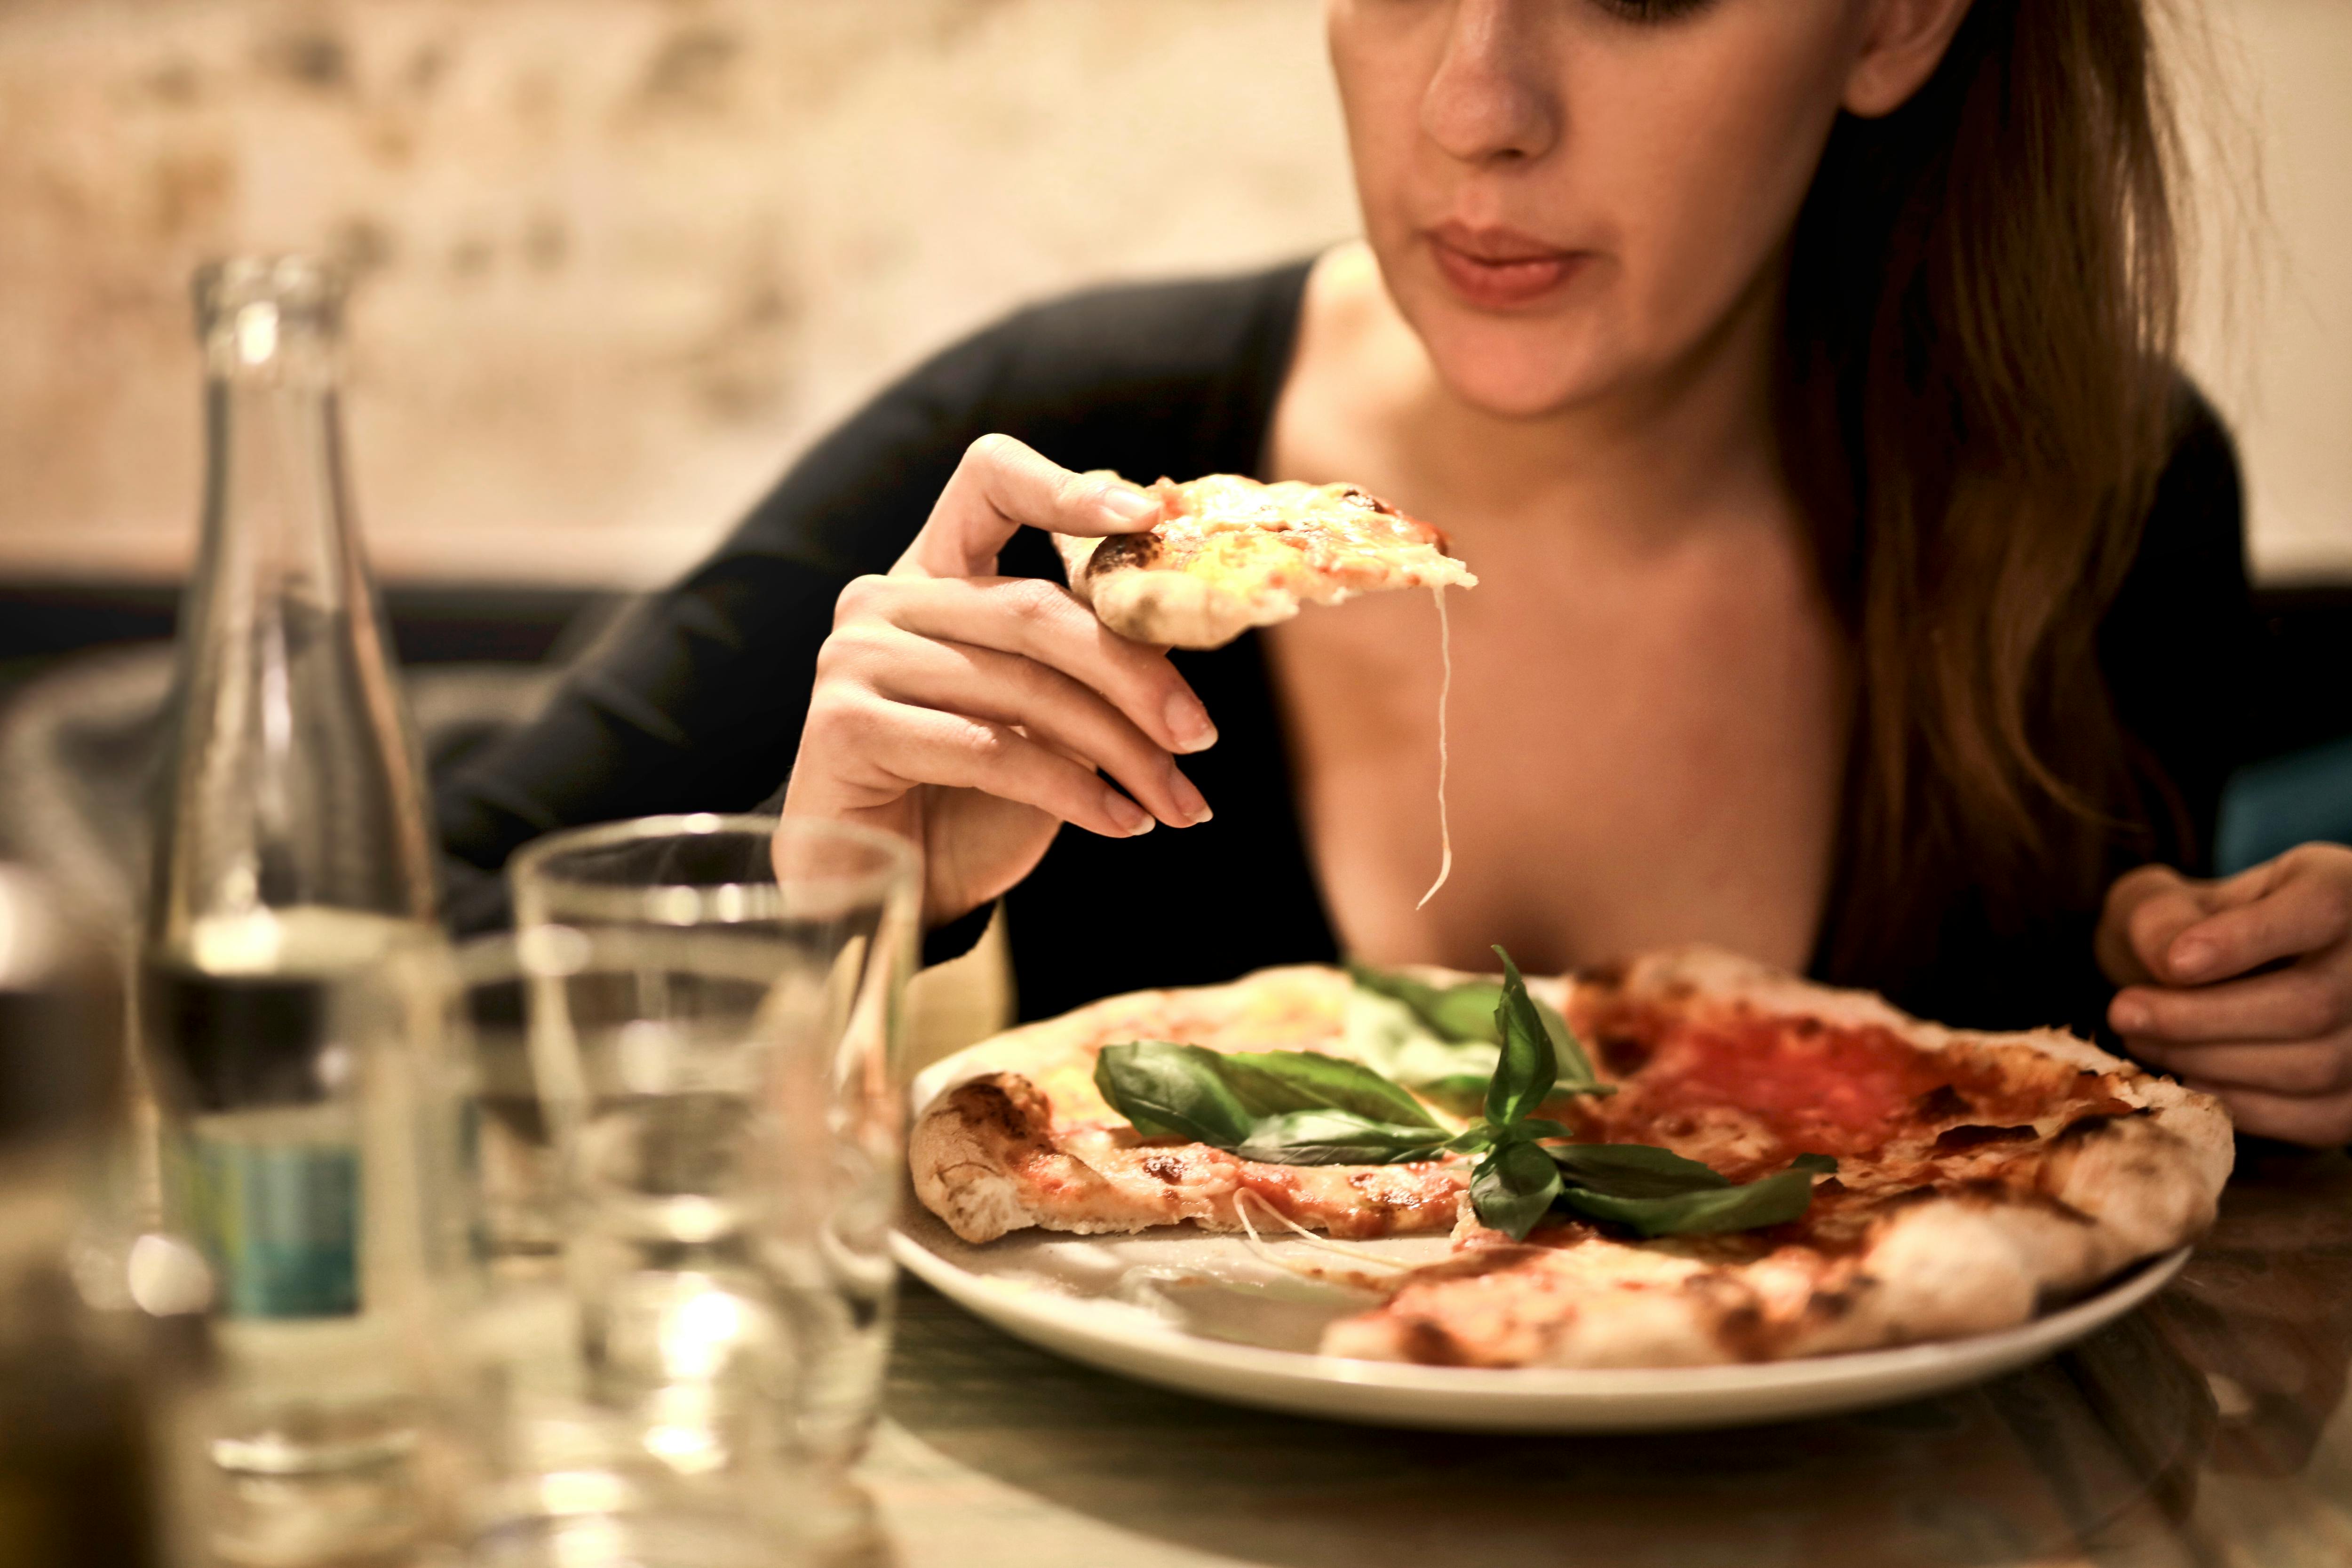 Woman eating a pizza. | Photo: Pexels